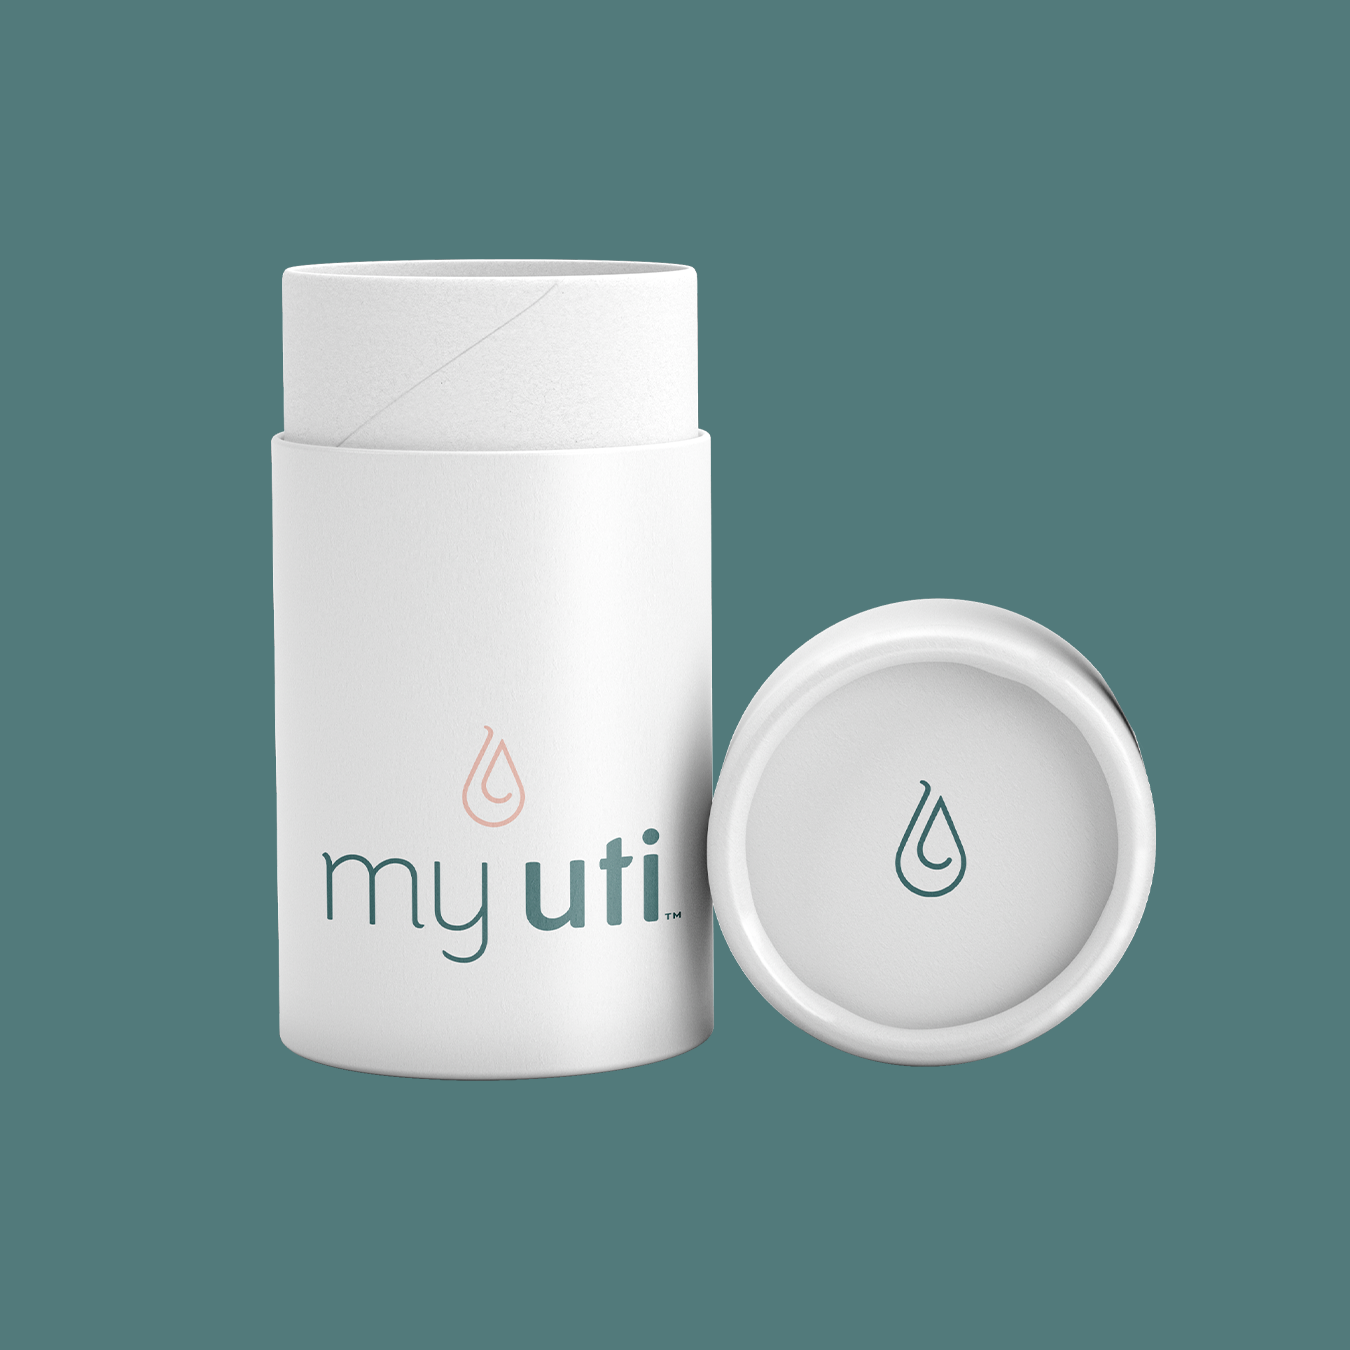 MyUTI Complete Home Test Kit Feature Dark.png